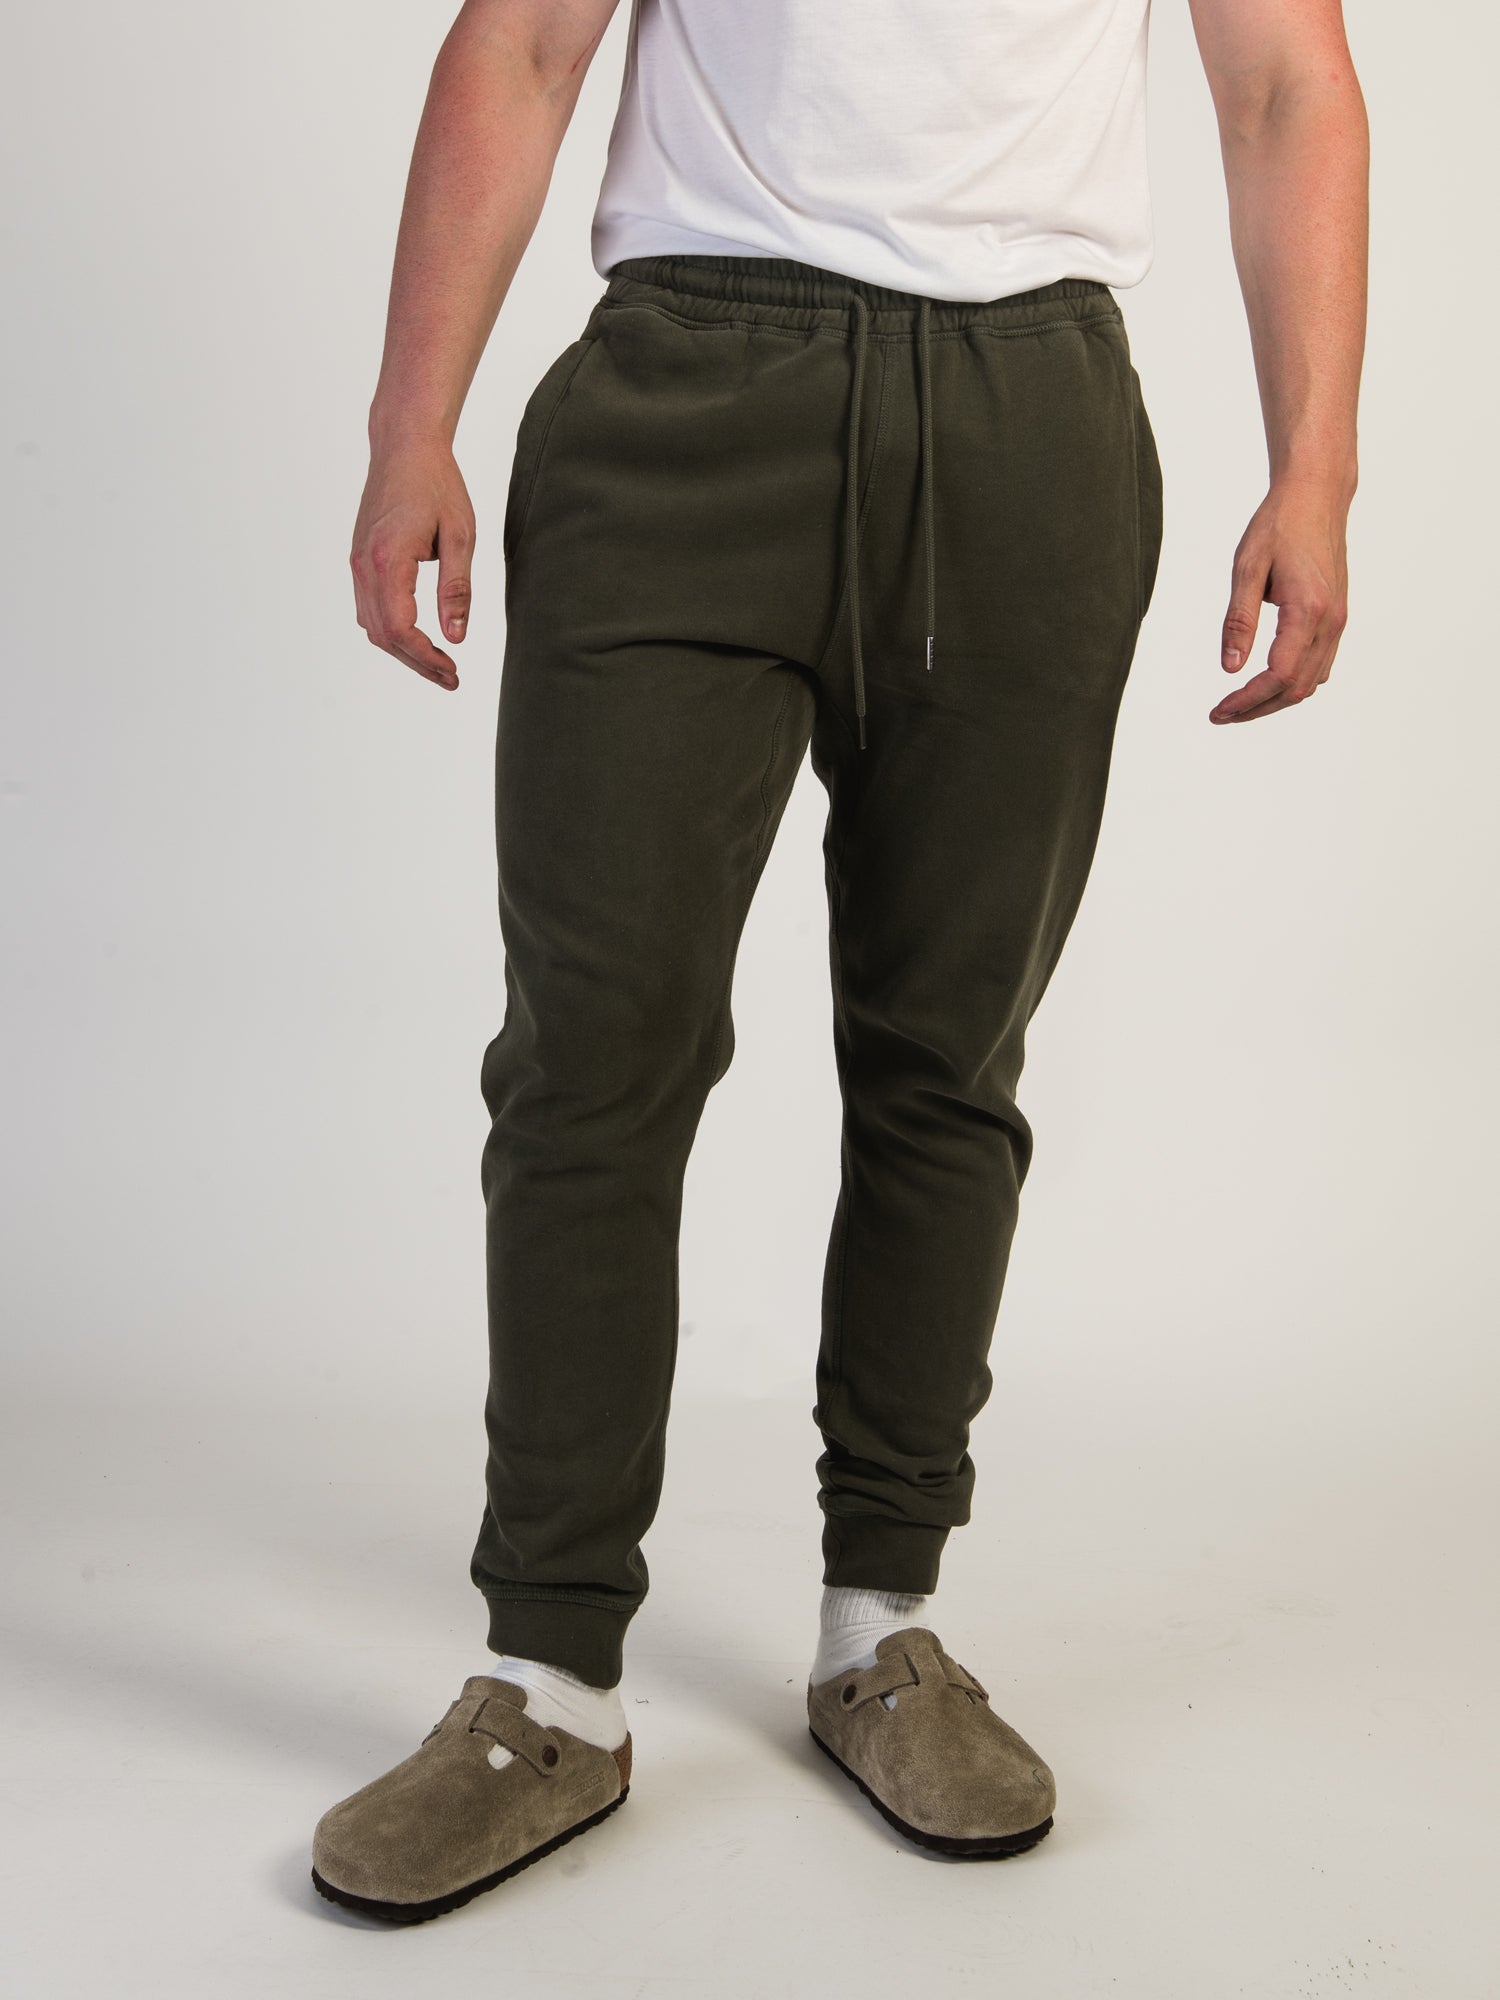 Verdusa Men's Drawstring Waist Side Pocket Straight Cargo Pants Joggers  Army Green S at  Men's Clothing store